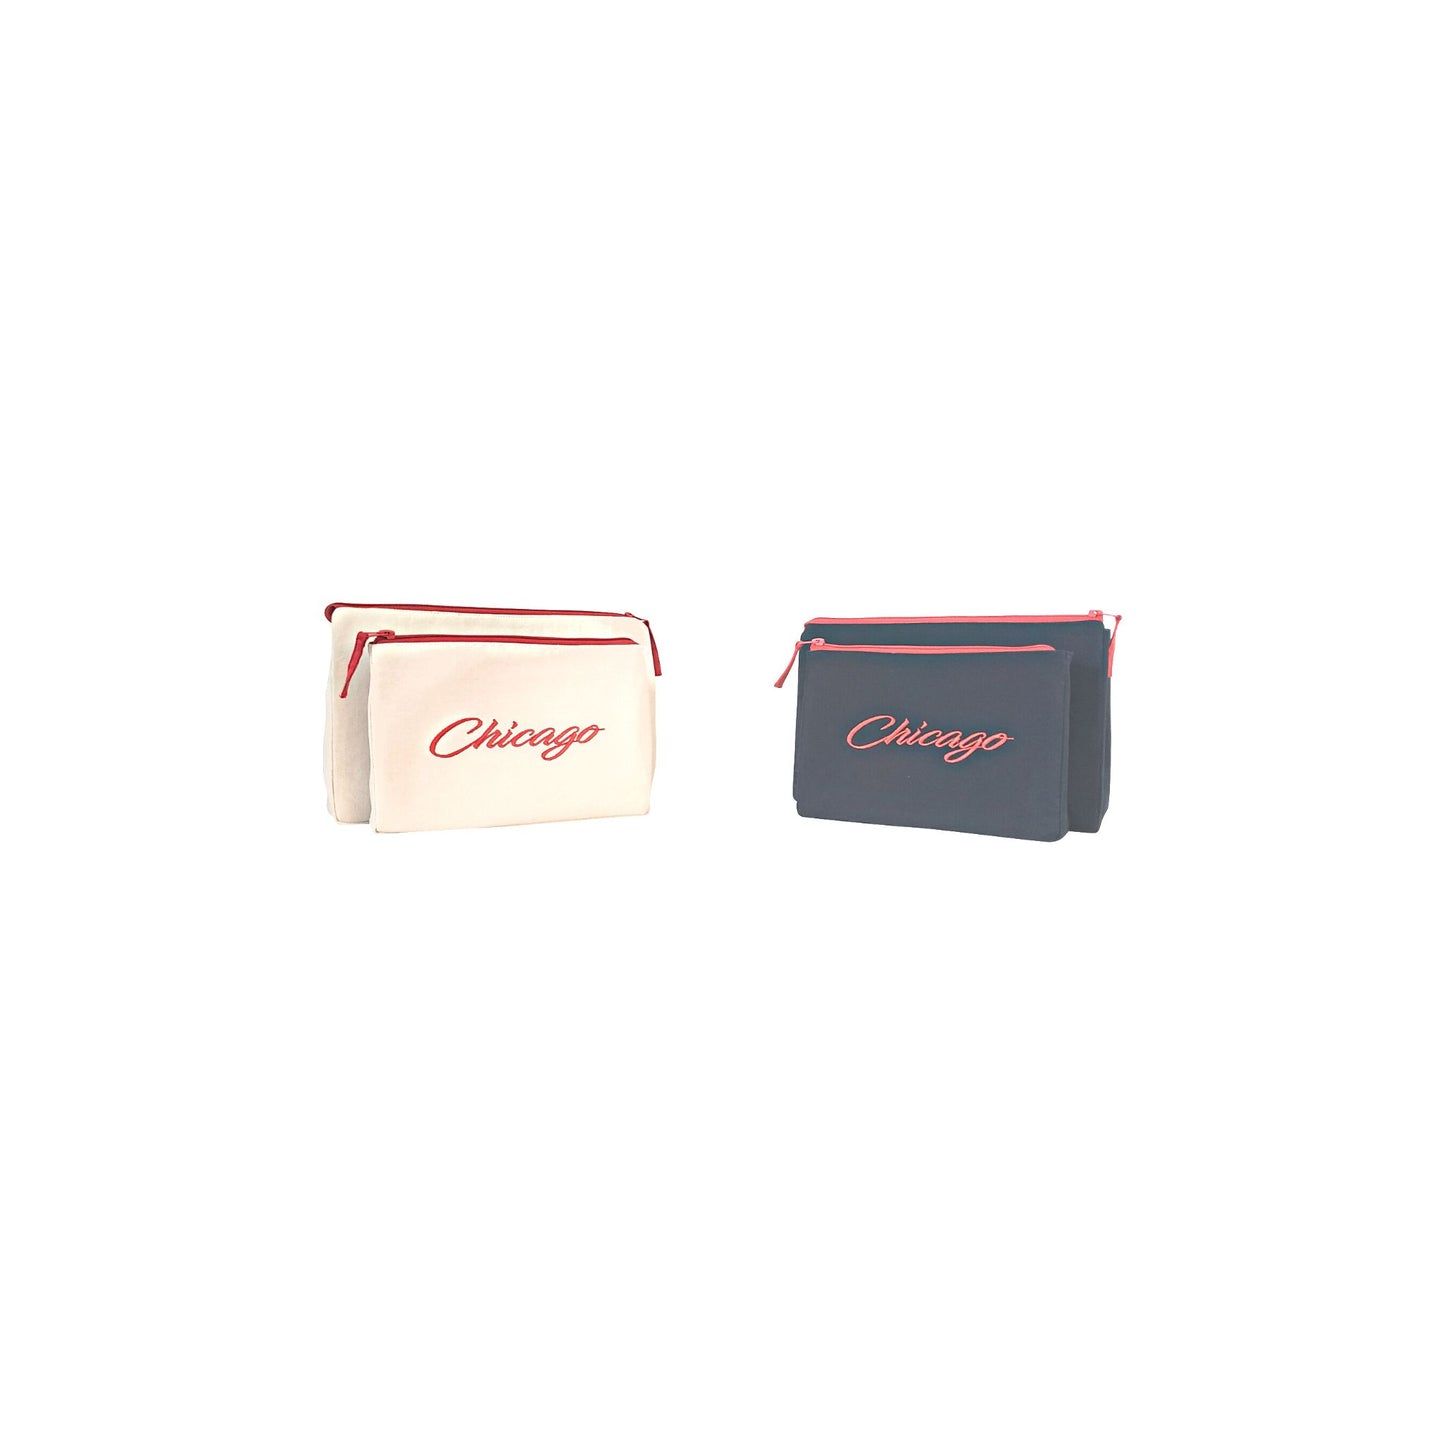 Chicago Makeup bag sets in Day and Night